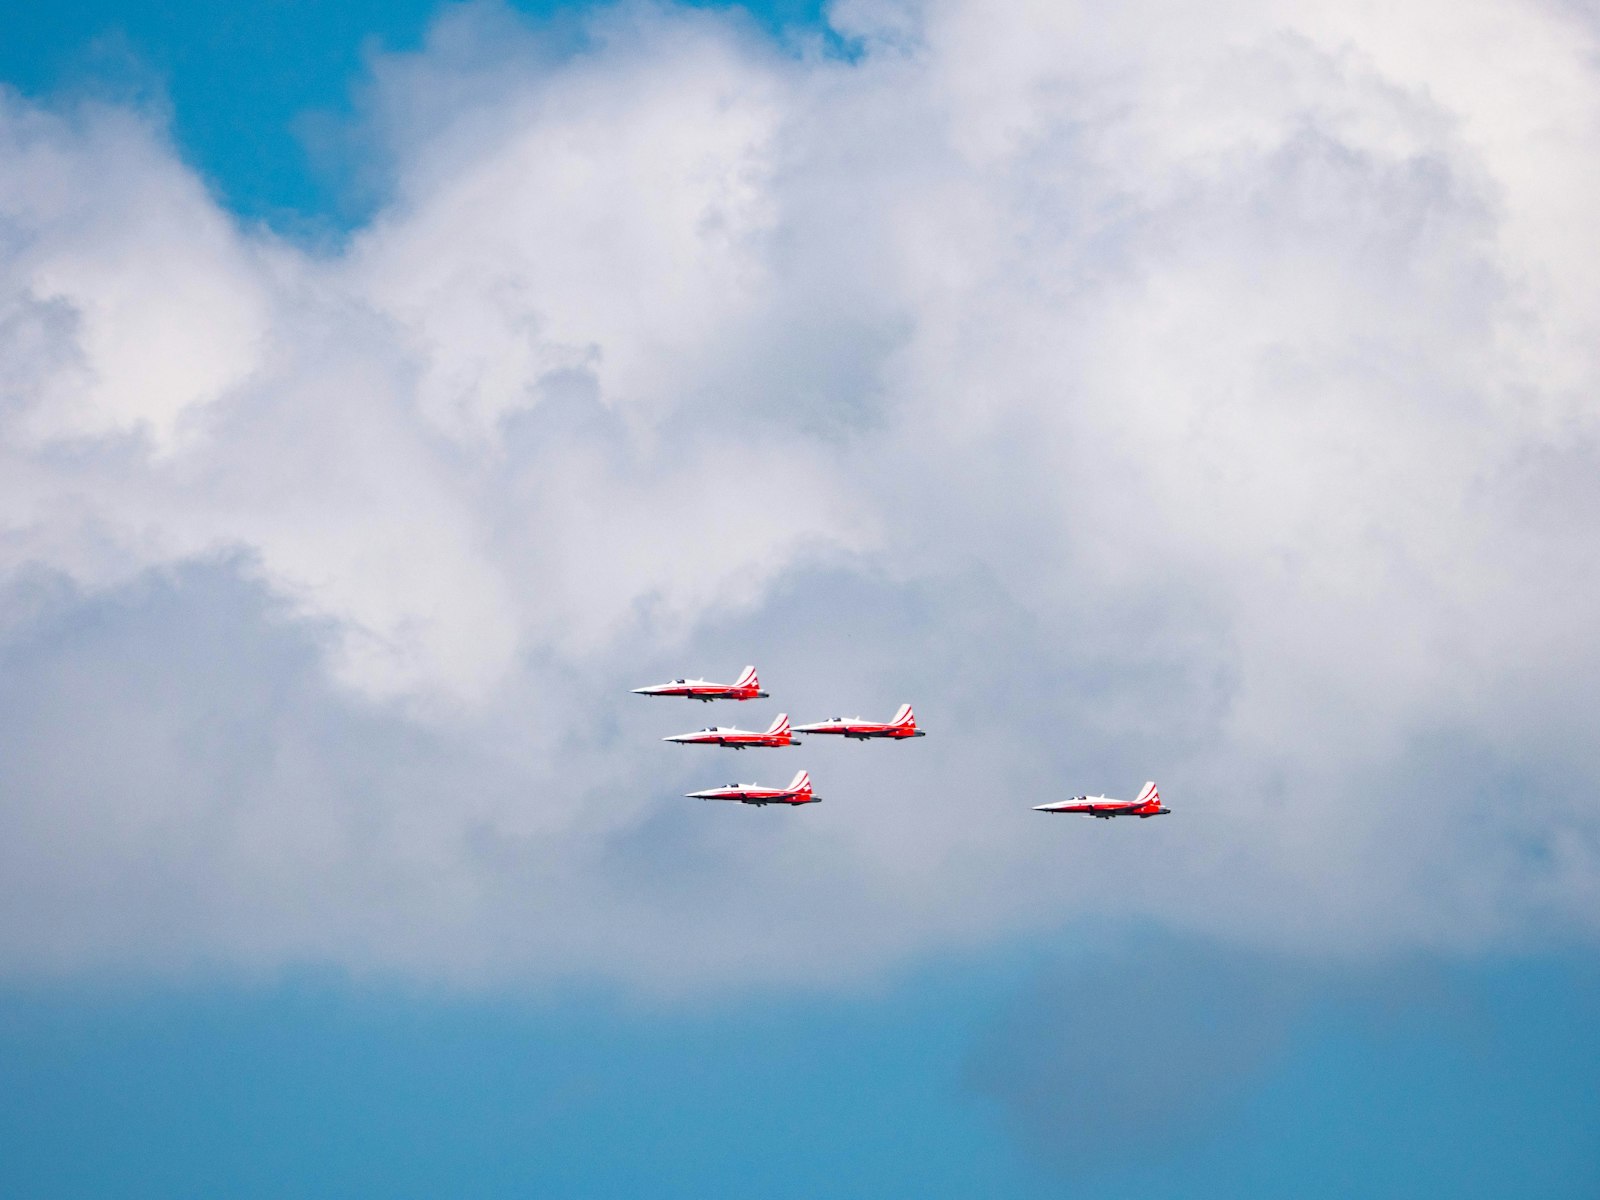 LEICA DG 100-400/F4.0-6.3 sample photo. Five red-and-white planes in photography